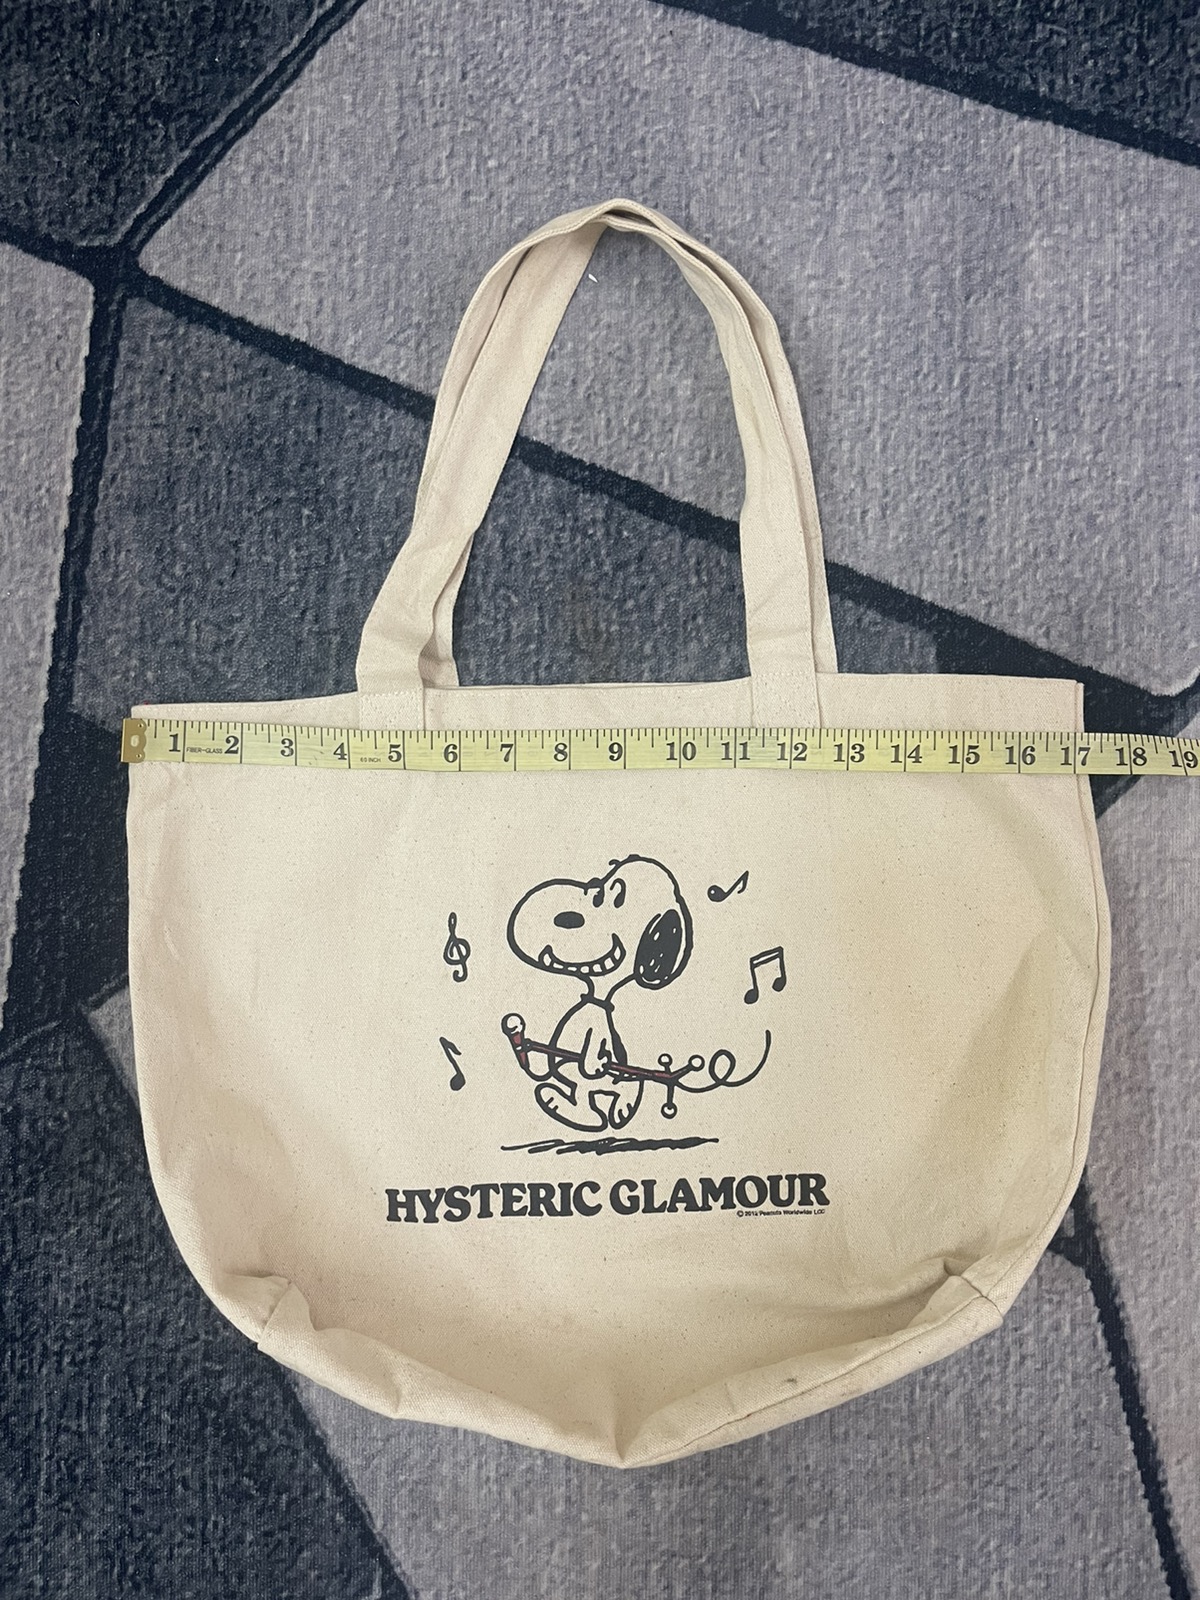 Vintage Hysteric Glamour X Snoopy Tote Bag - 6